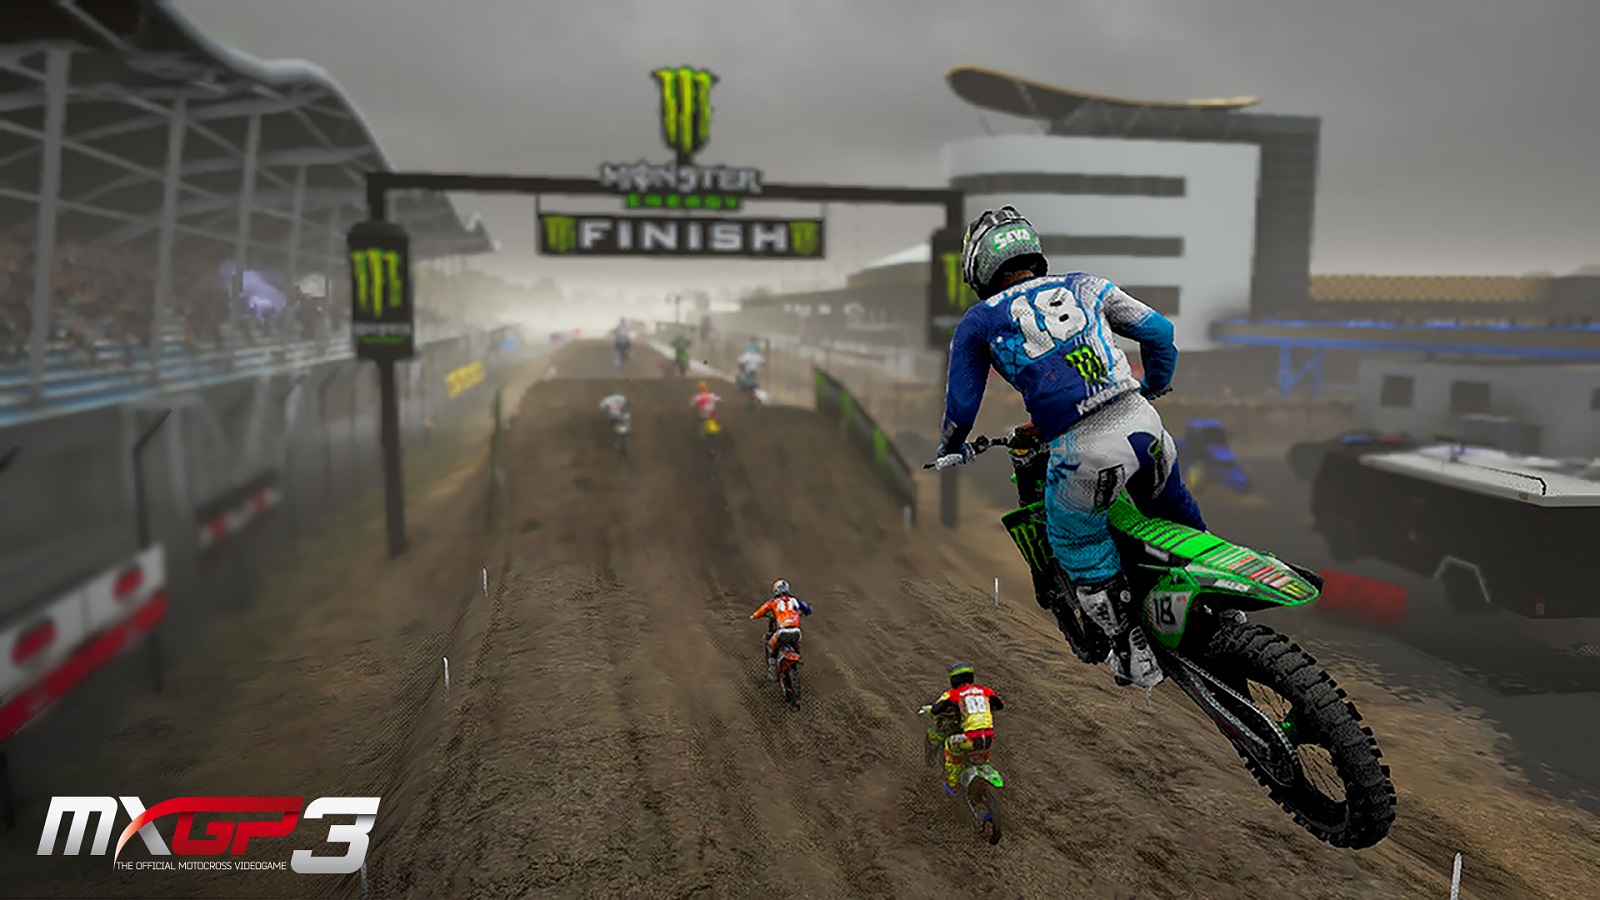 MXGP - The Official Motocross Videogame has a new gameplay trailer.